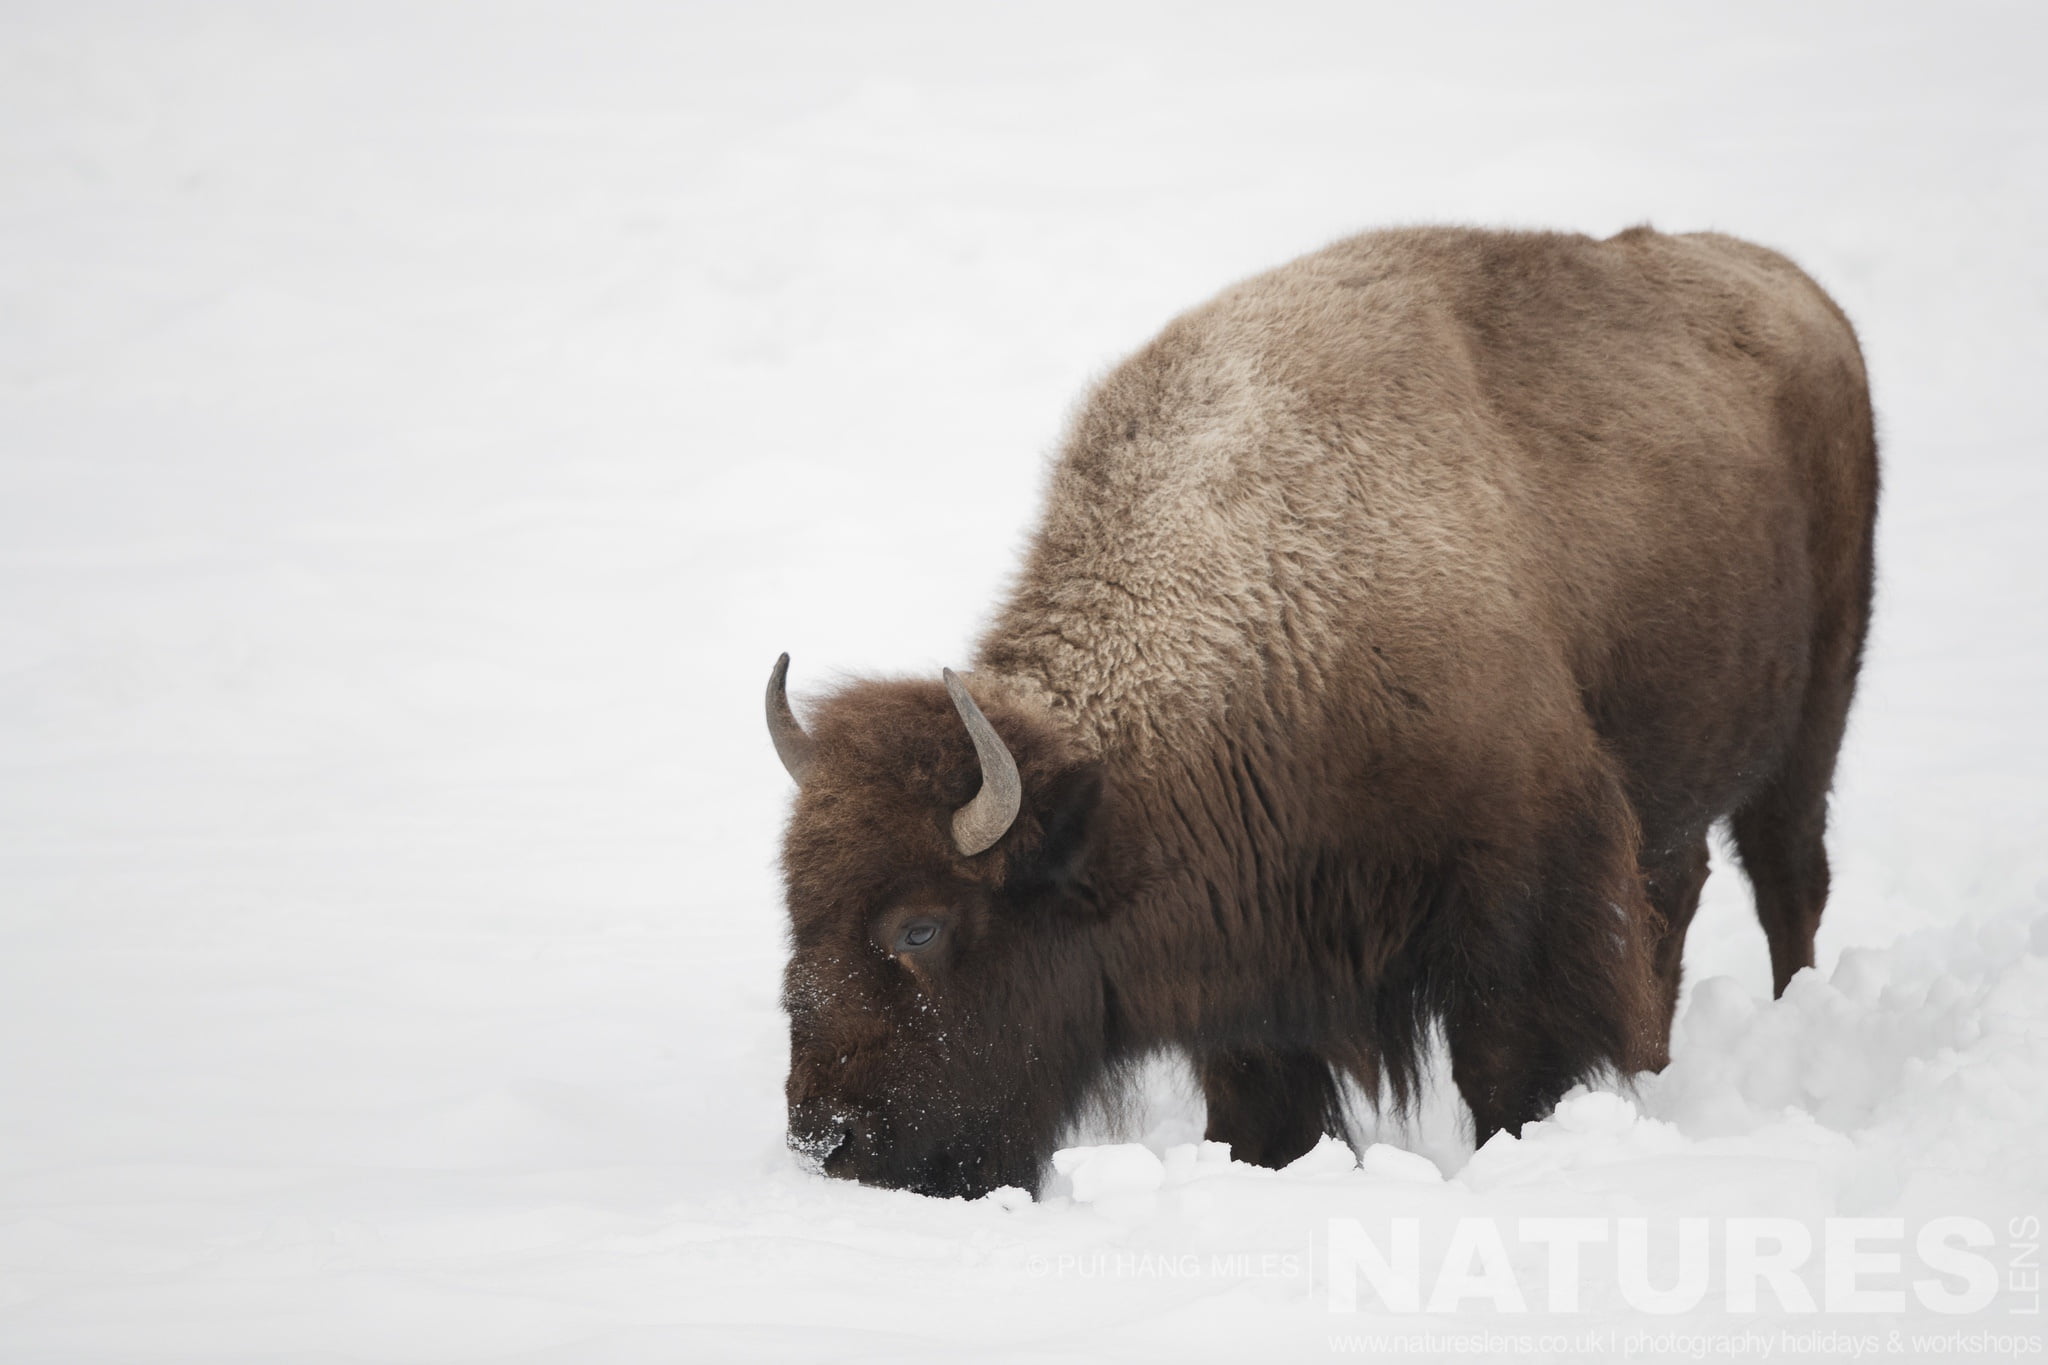 One of Yellowstone's Bison seeking vegetation beneath the snow - typical of the type of image that you will capture during the Wildlife of Yellowstone in Winter Photography Holiday